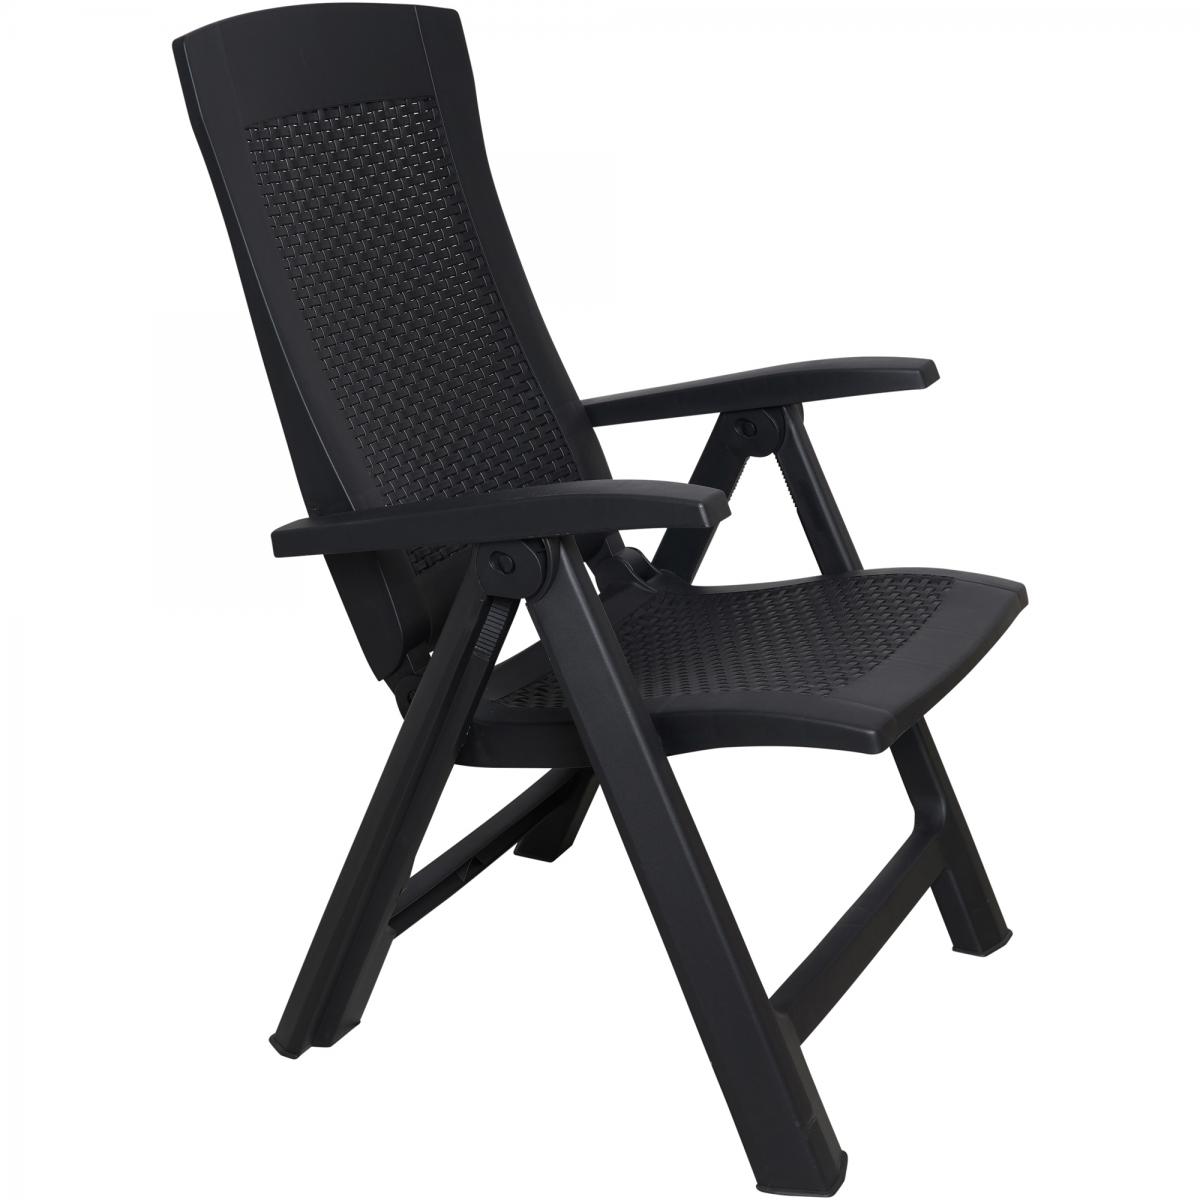 alter fauteuil pliant multiposition, effet rotin, made in italy, 59 x 67 x 106 cm, couleur anthracite  anthracite